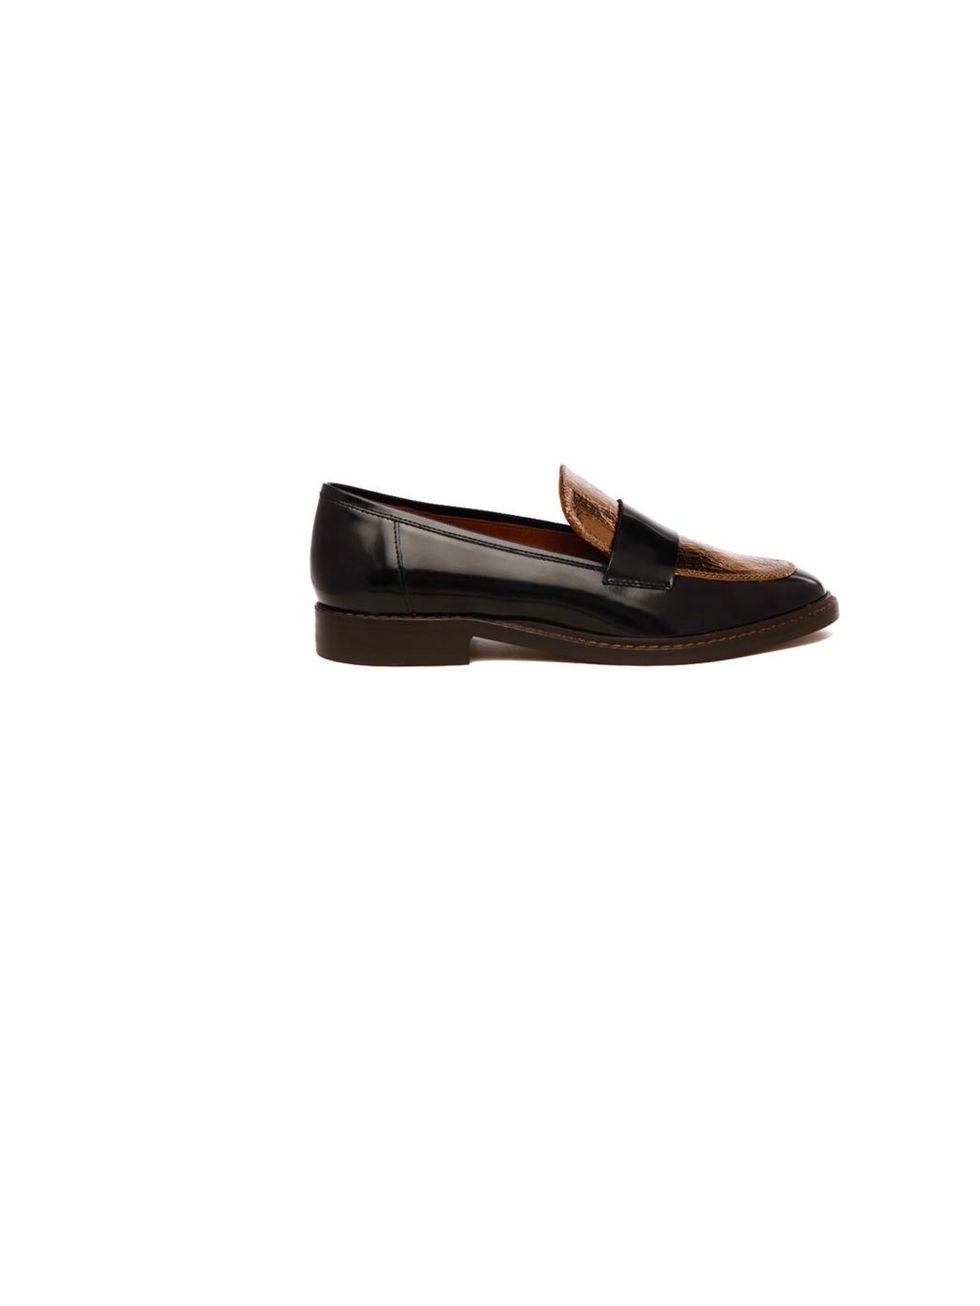 <p><a href="http://www.bimbaylola.com/shoponline/product.php?id_product=8033&id_category=408">Bimba & Lola</a> loafers, were £130 now £90</p>